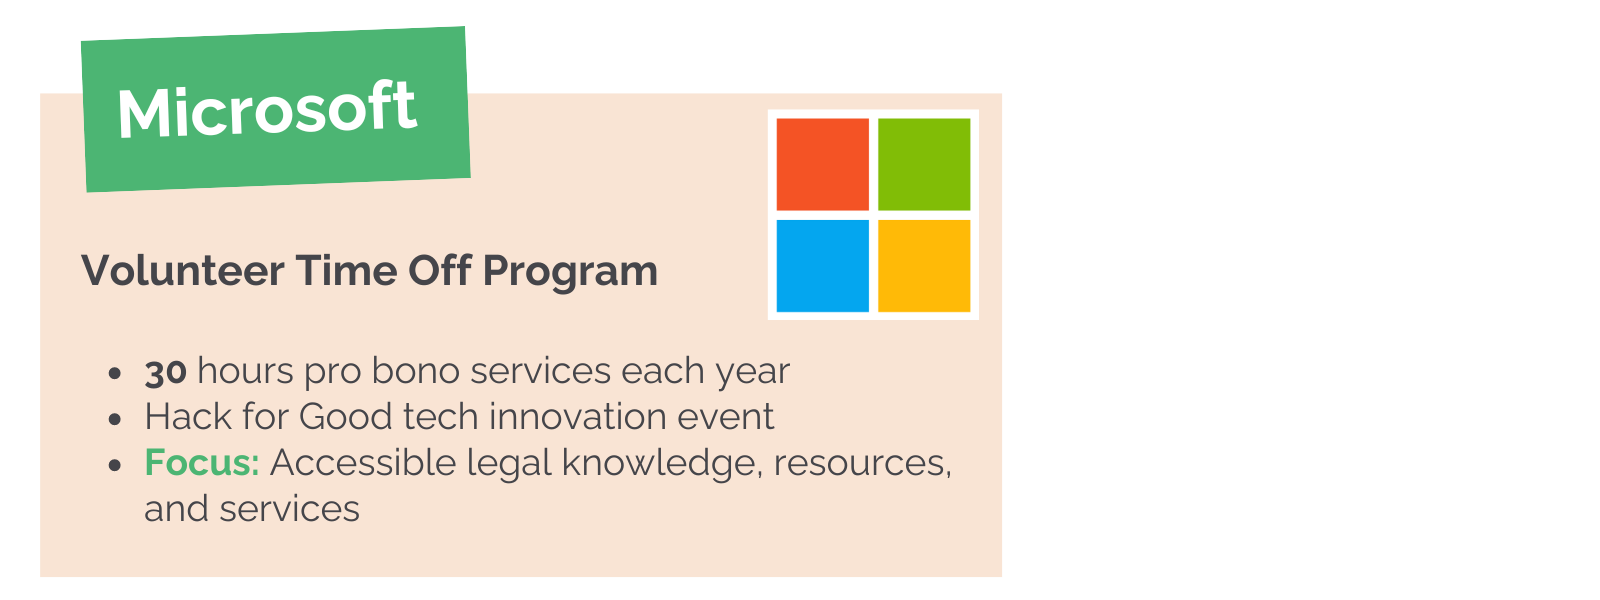 Microsoft offers paid volunteer time off programs for its employees.